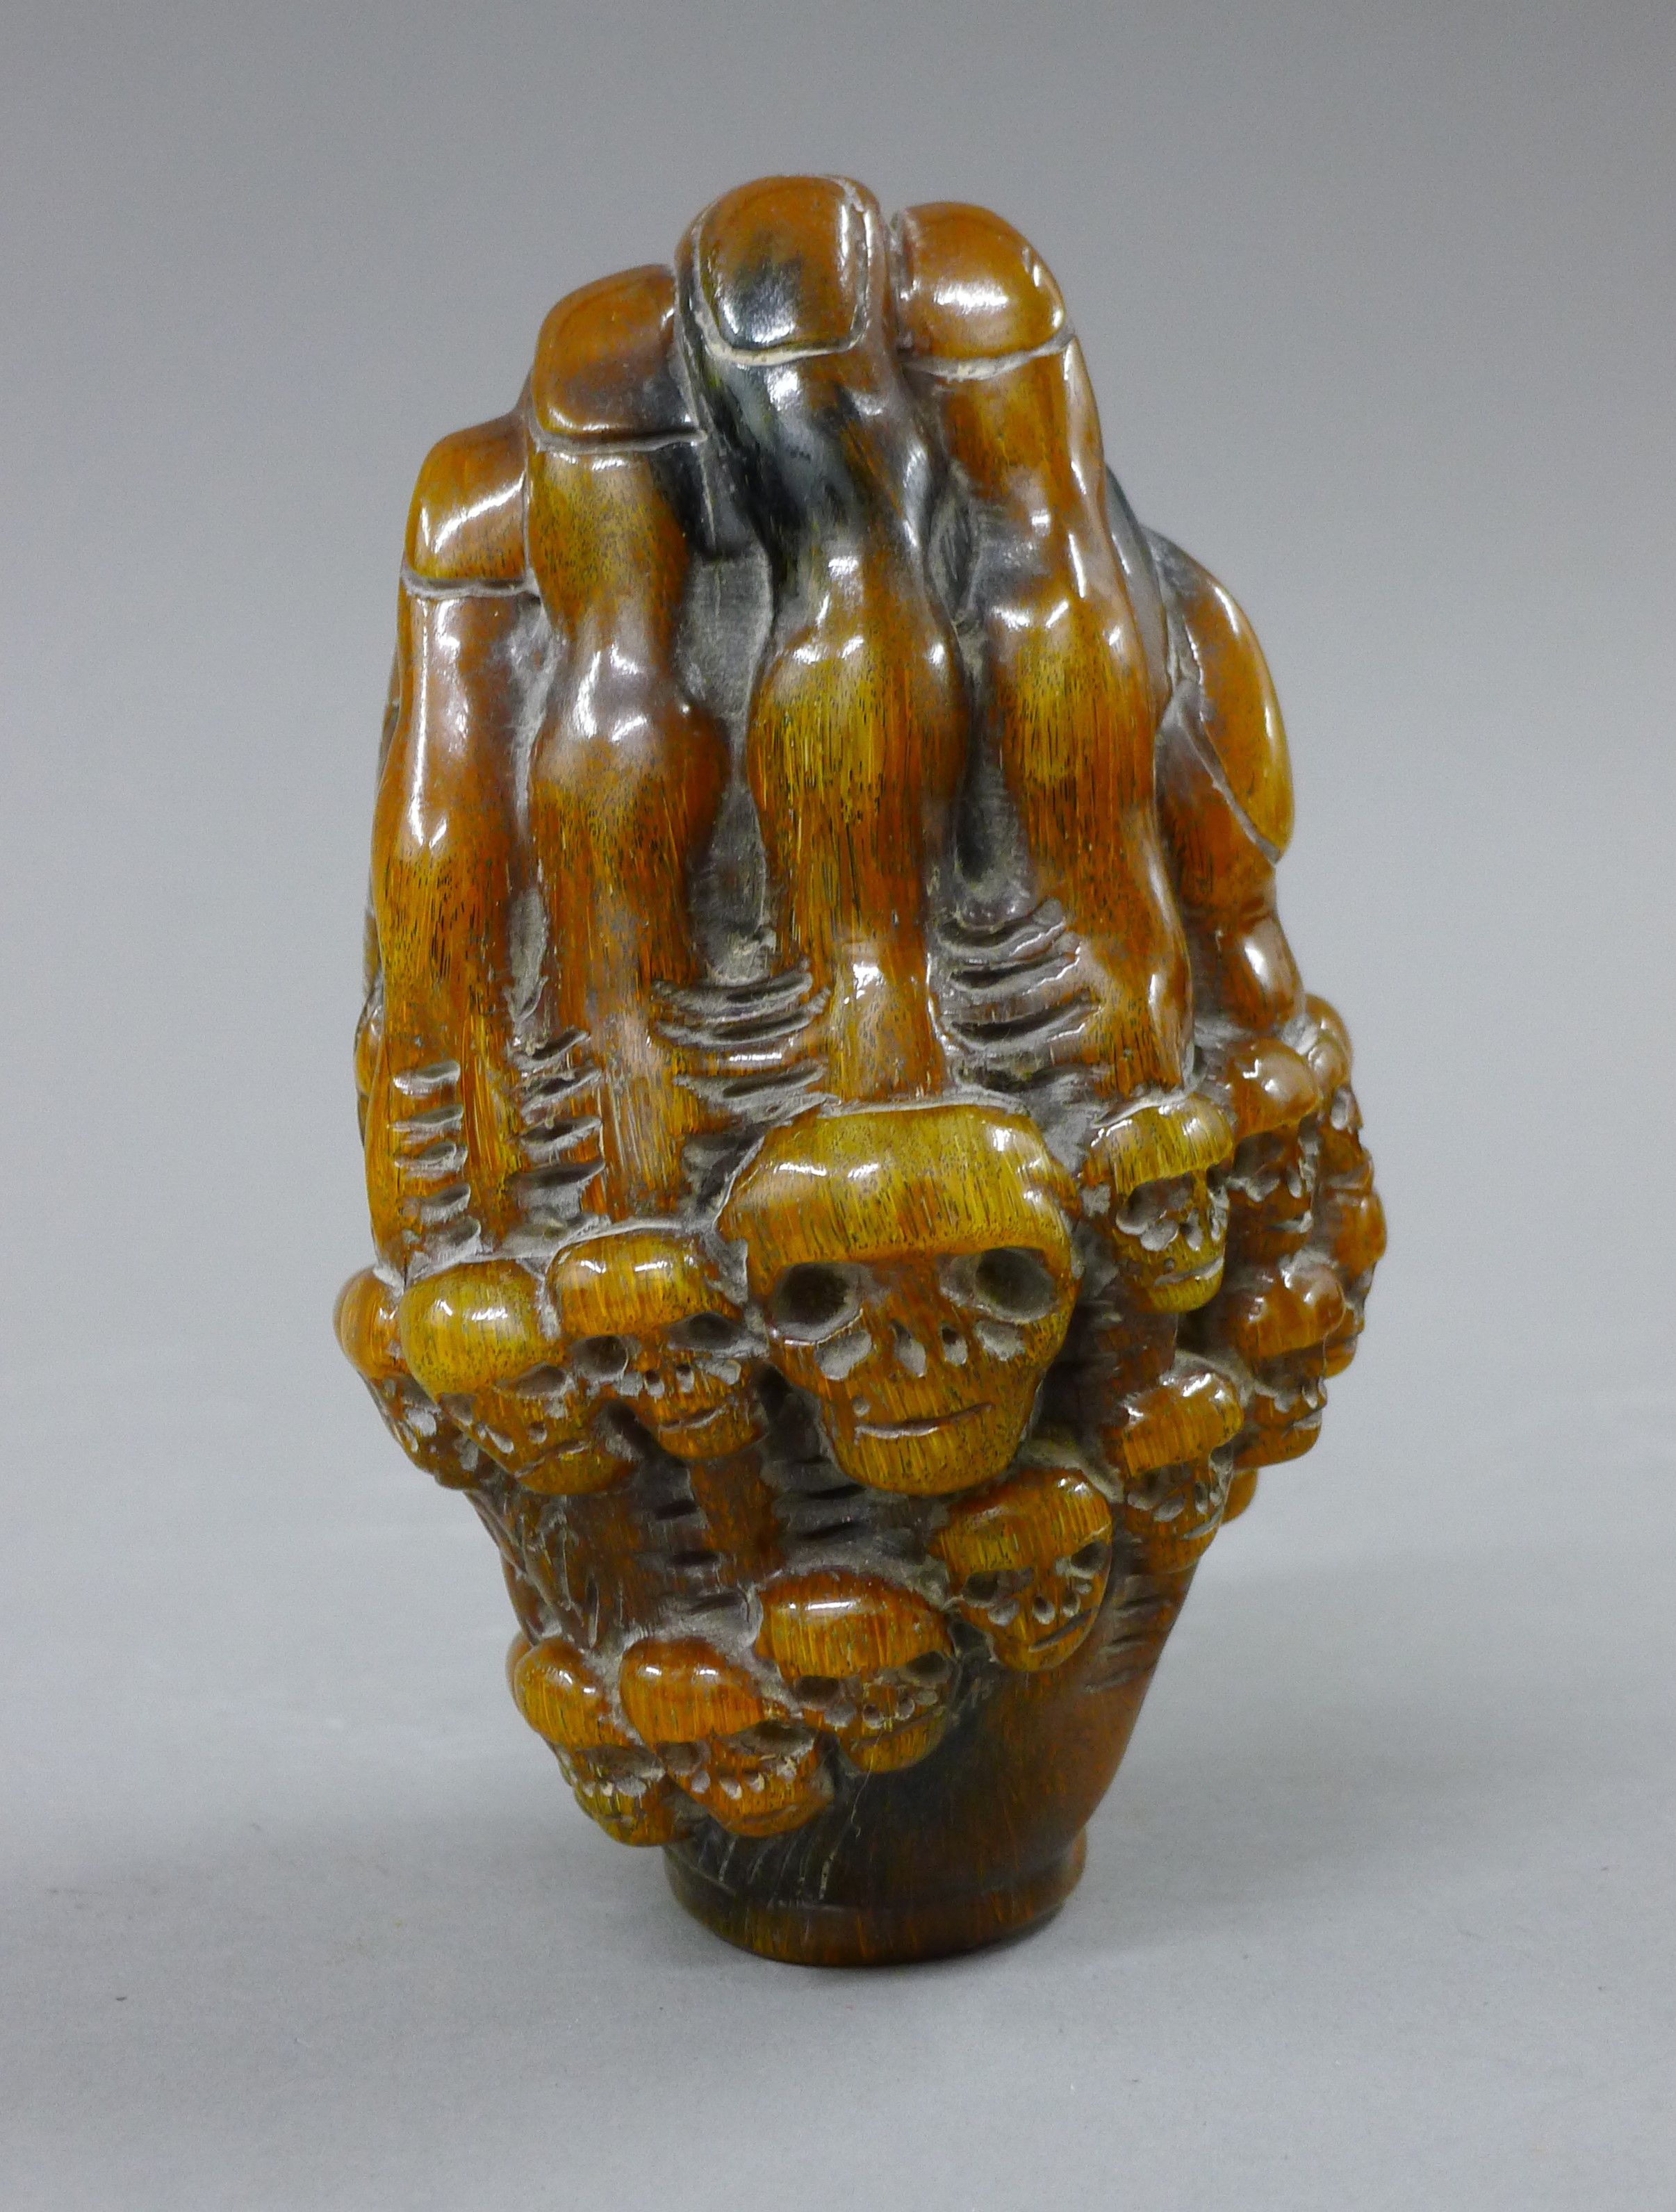 A model of hands and skulls. 14.5 cm high. - Image 3 of 5